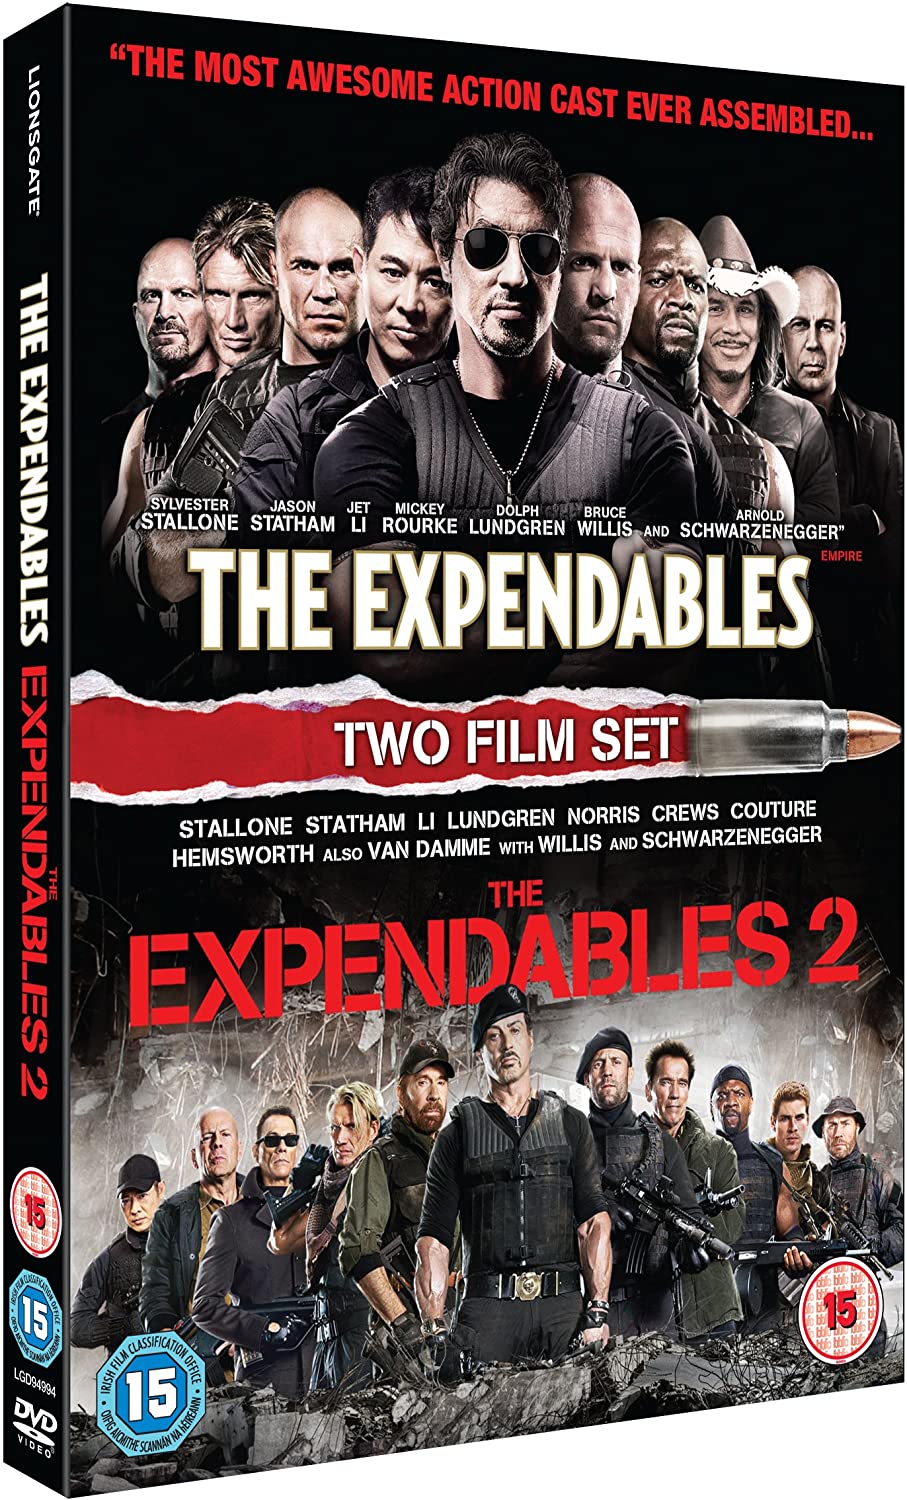 The Expendables / The Expendables 2 [2017] - Action [DVD]